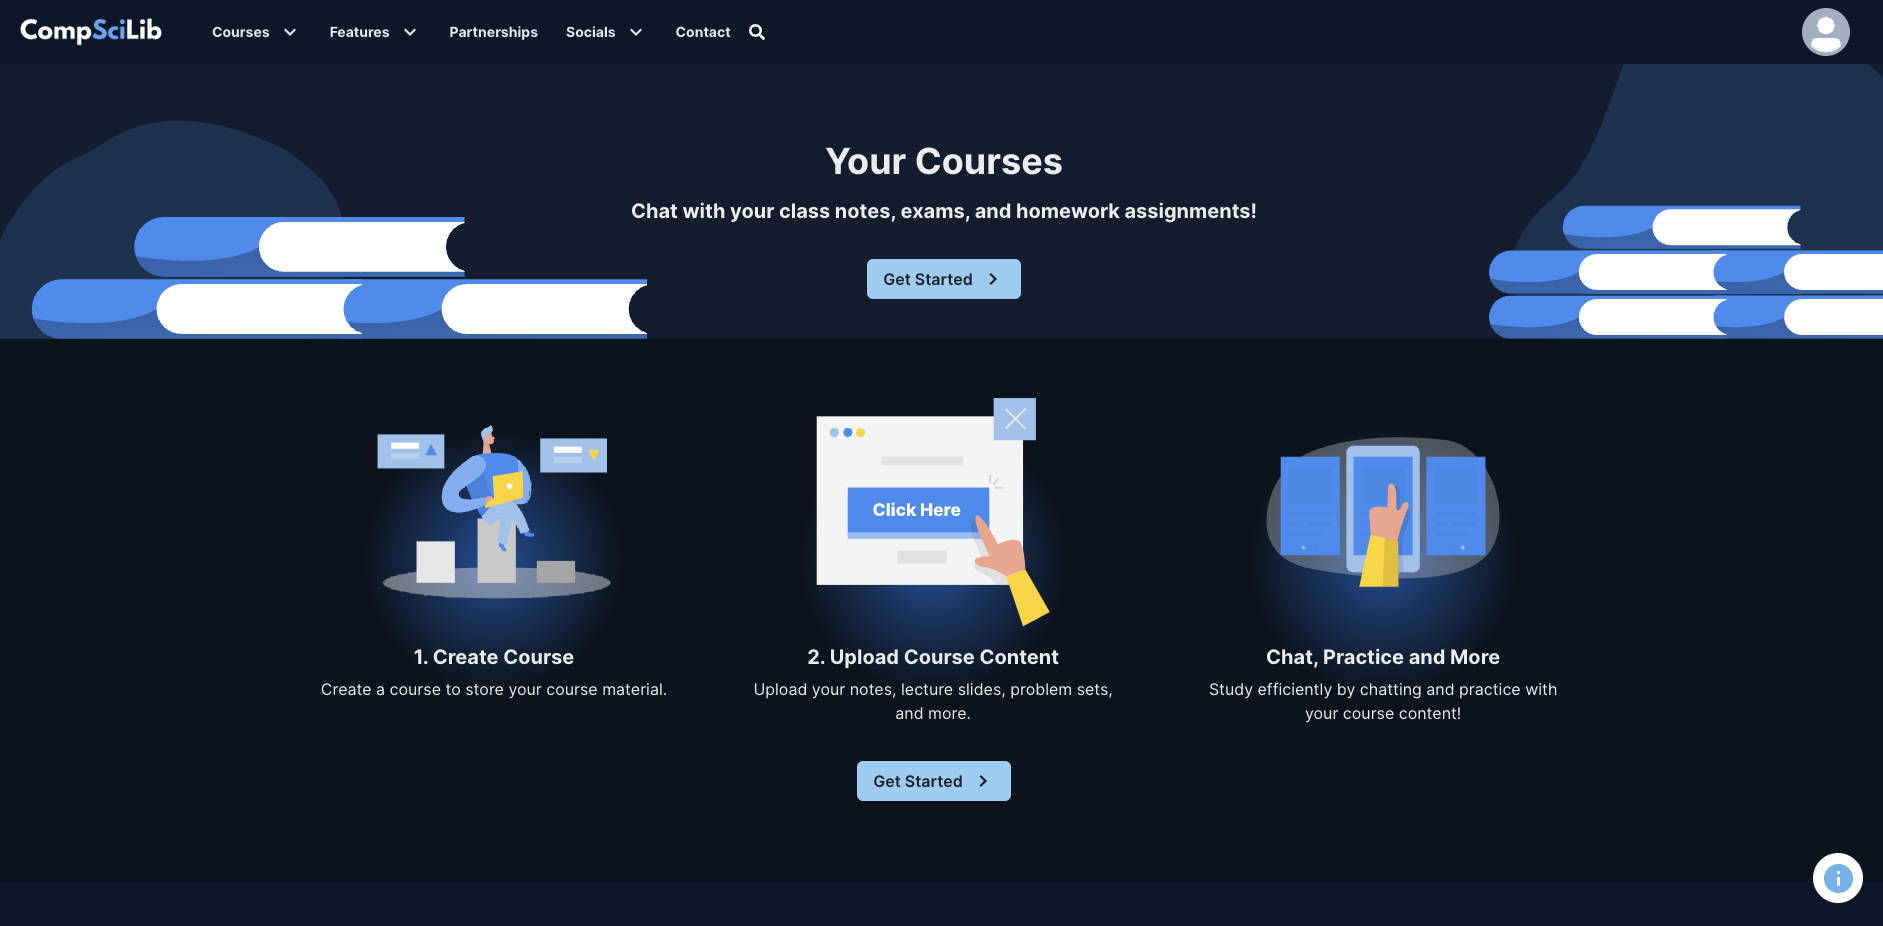 Study with your Course Content